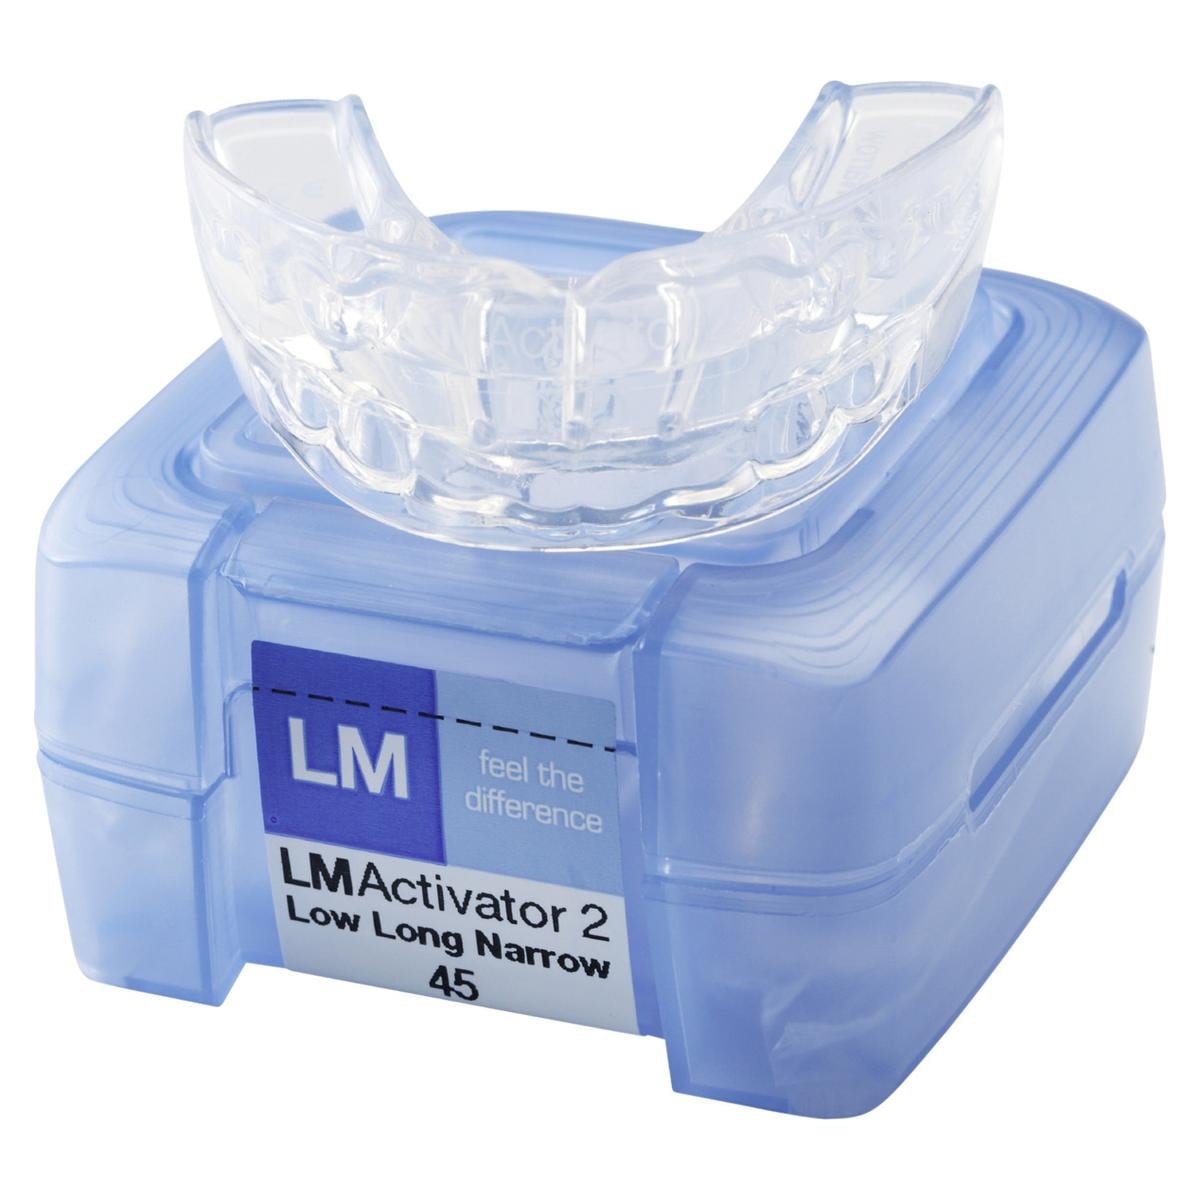 LM Activator 2 Low Long - Narrow - Size 65 (94265LLN)